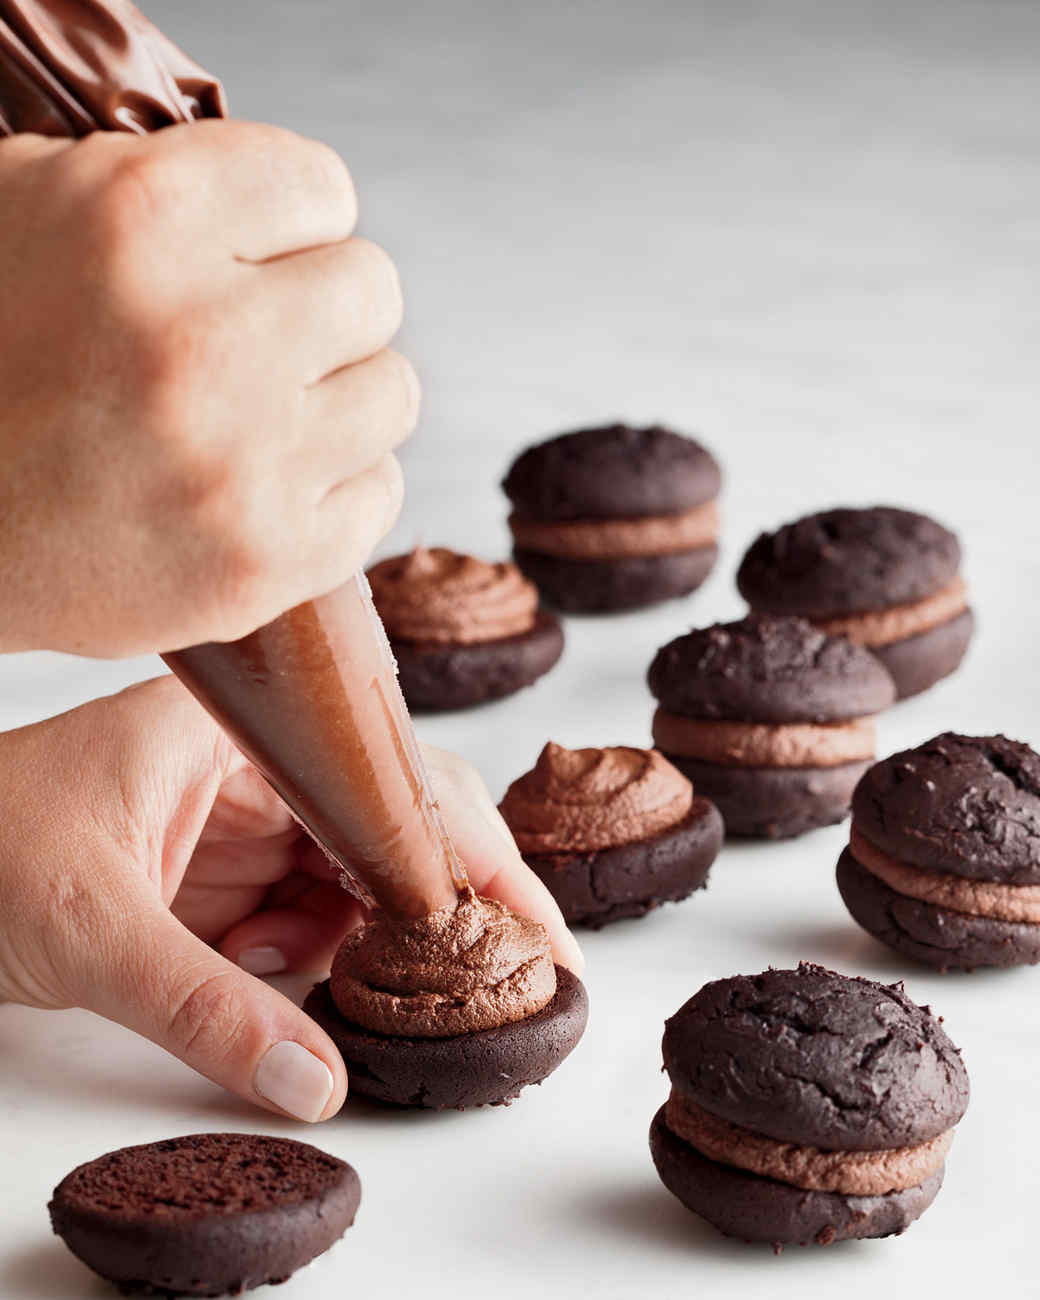 What is an easy recipe for whoopie pie filling?